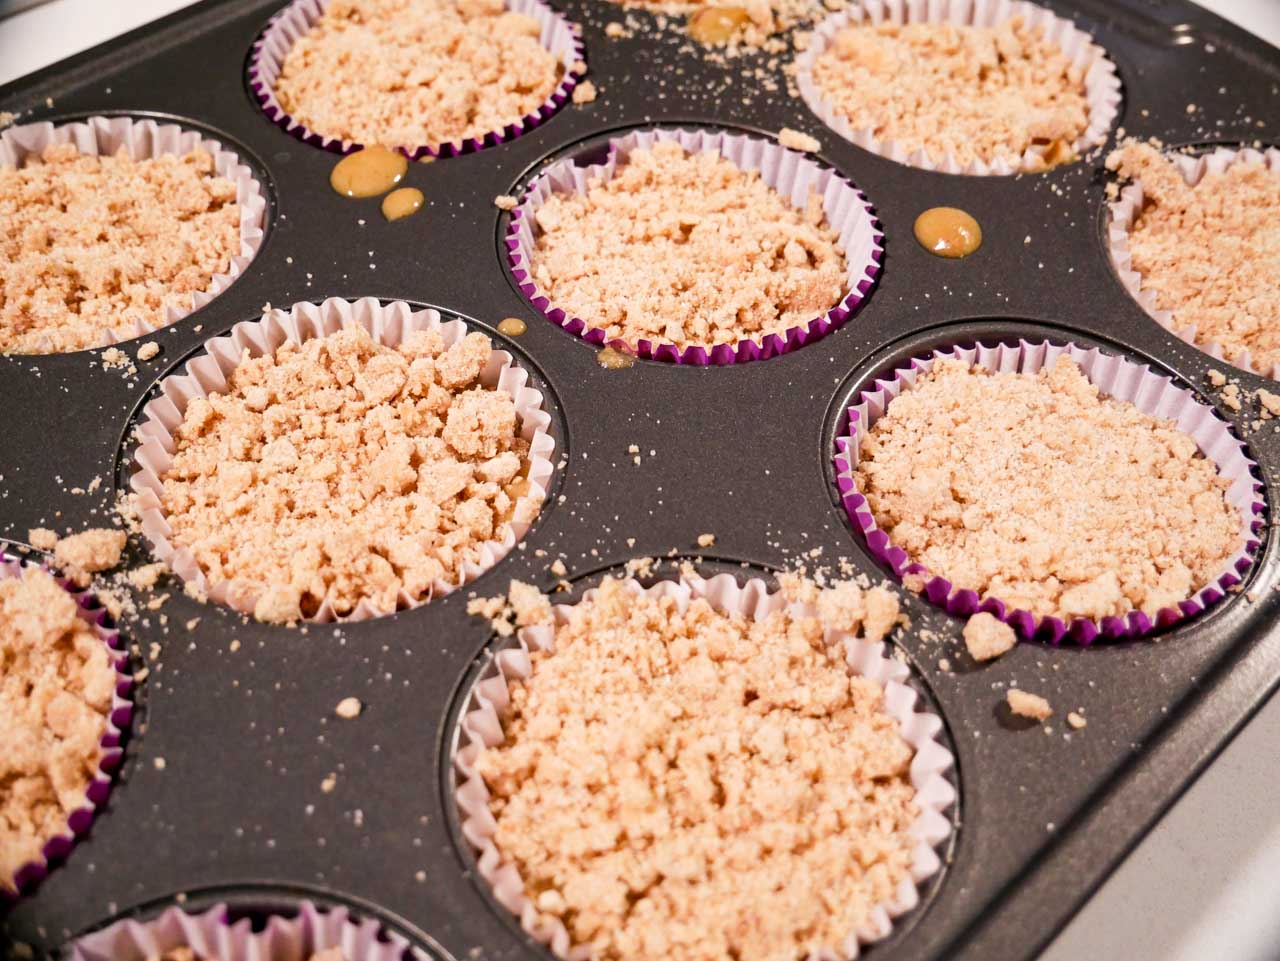 Streusel on top of plum muffin batter in cupcake pan